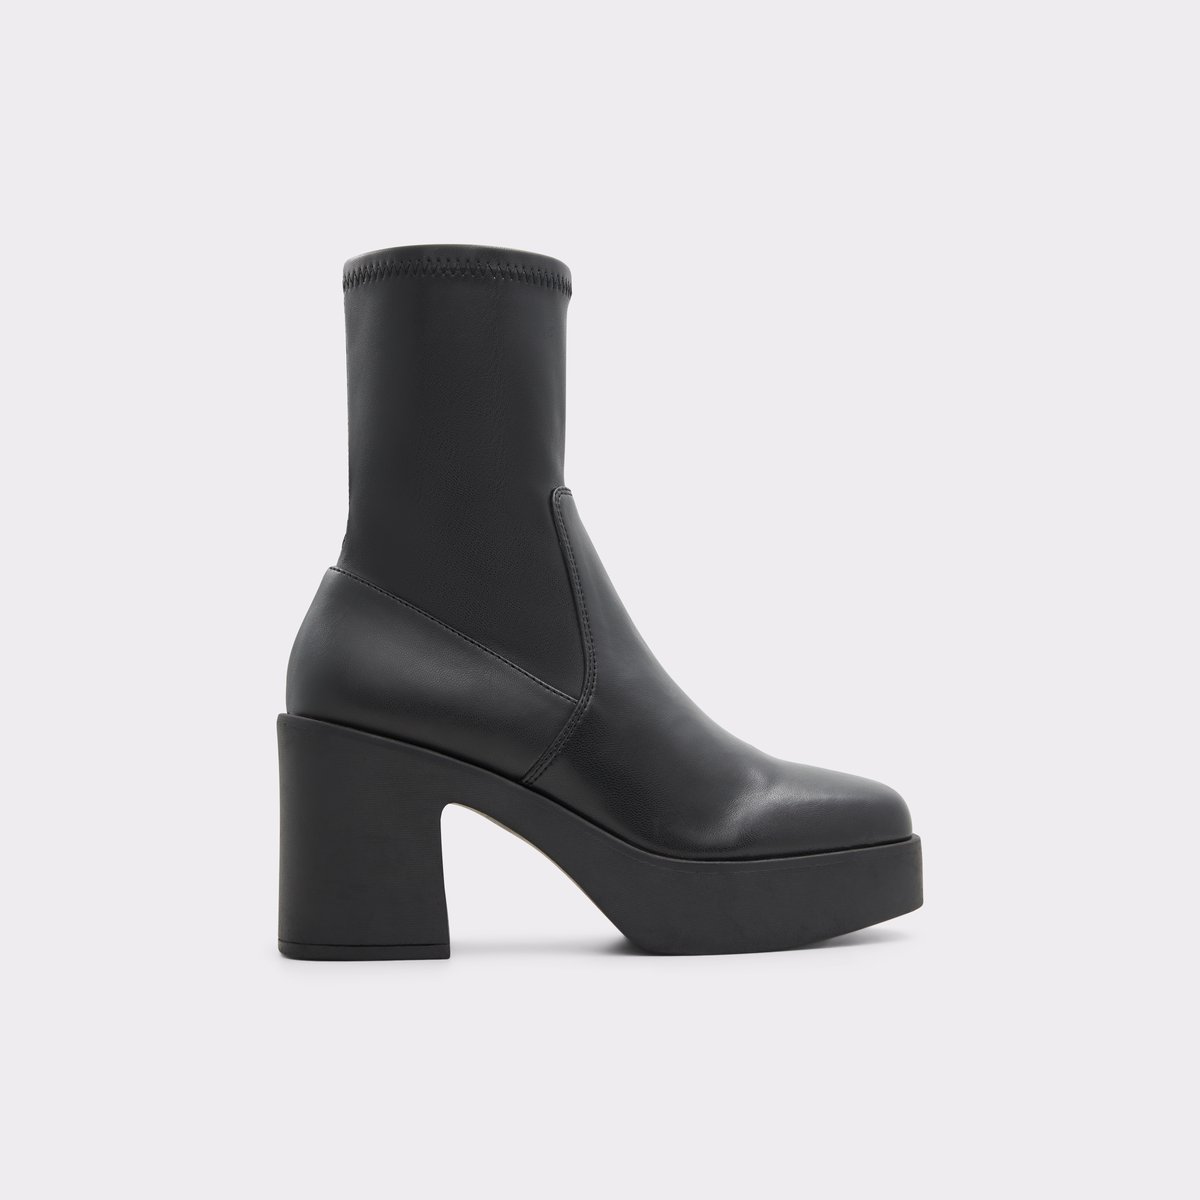 Upstep Black Synthetic Stretch Women's Ankle boots | ALDO Canada